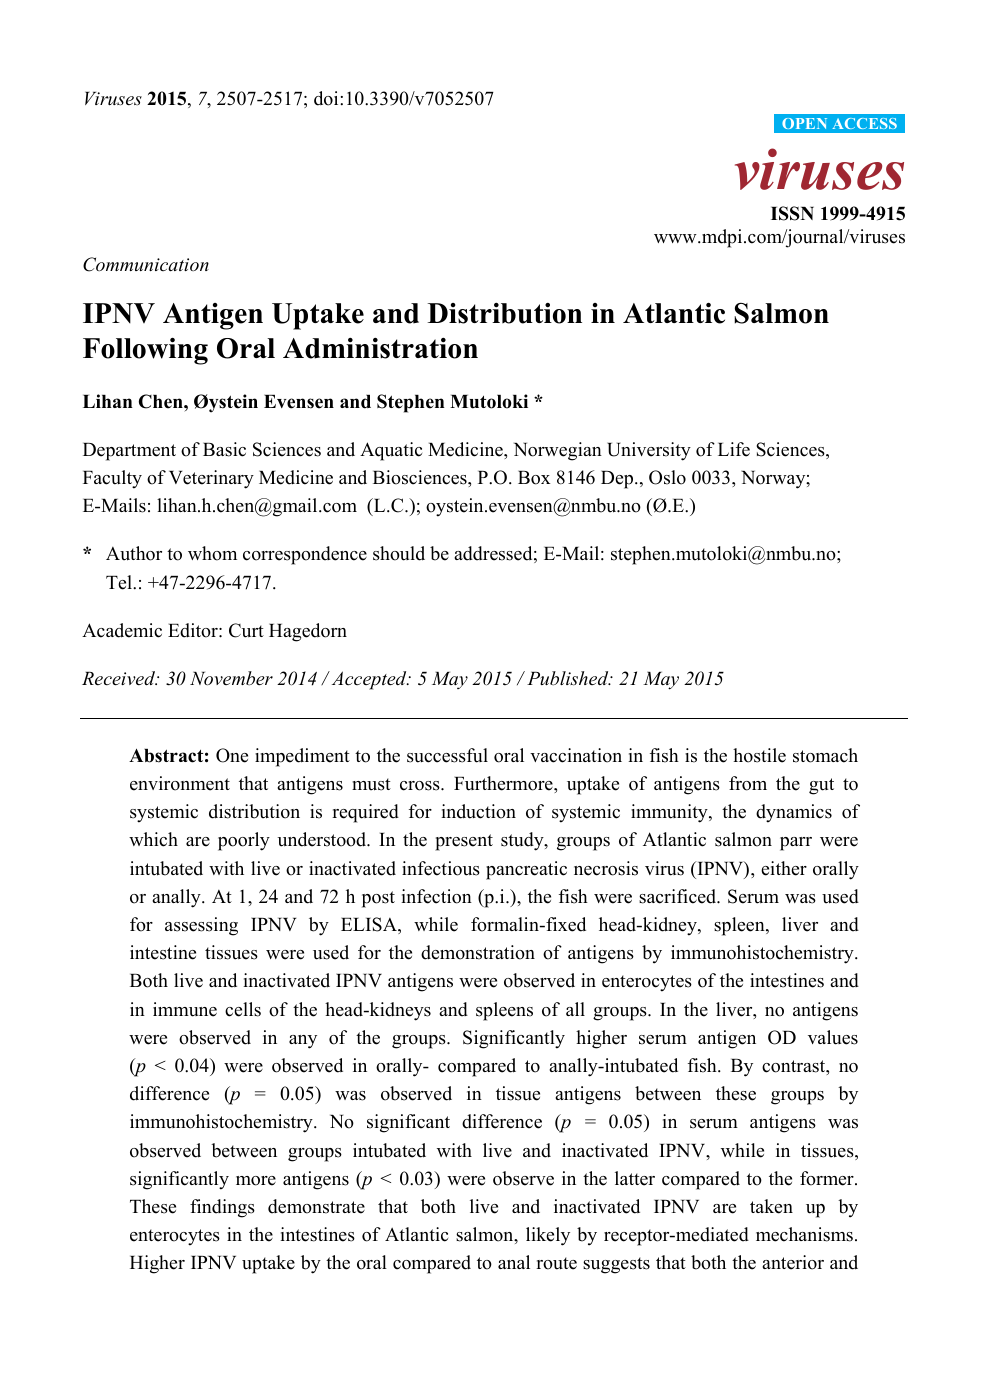 Ipnv Antigen Uptake And Distribution In Atlantic Salmon Following Oral Administration Topic Of Research Paper In Veterinary Science Download Scholarly Article Pdf And Read For Free On Cyberleninka Open Science Hub